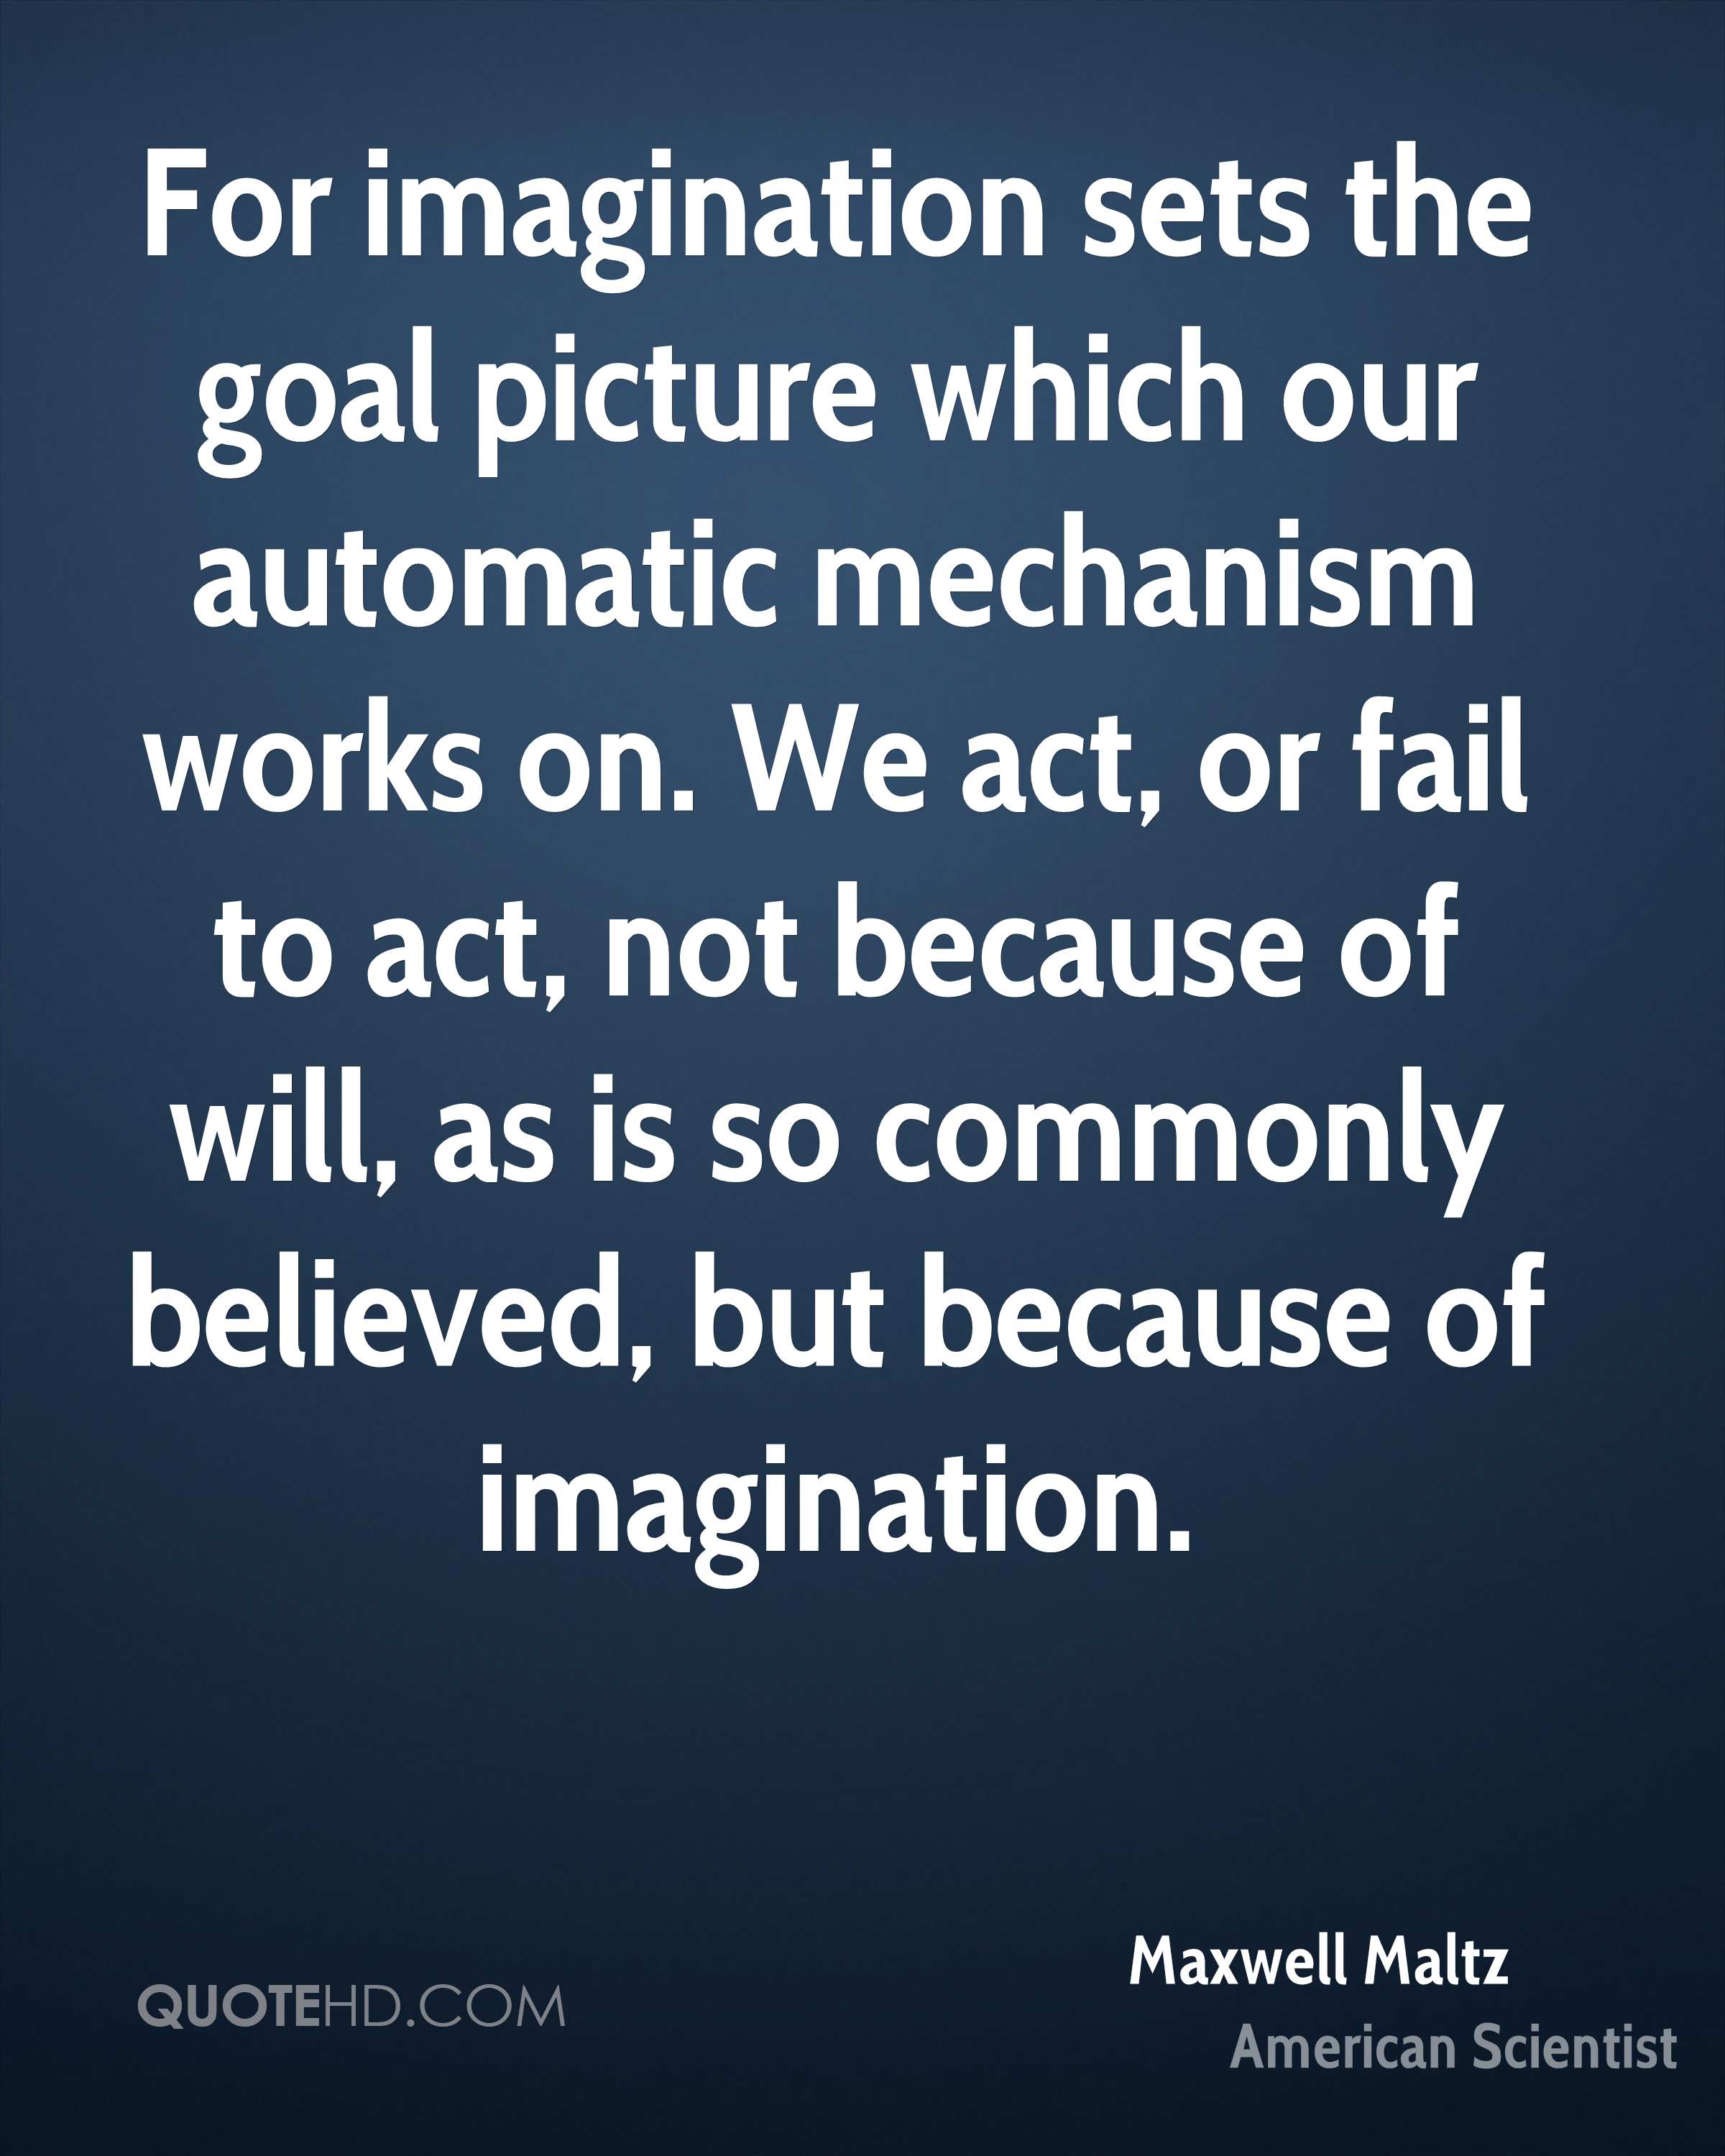 For imagination sets the goal picture which our automatic mechanism works on. We act, or fail to act, not because of will, as is so commonly believed, but because of imagination. Maxwell Matlz